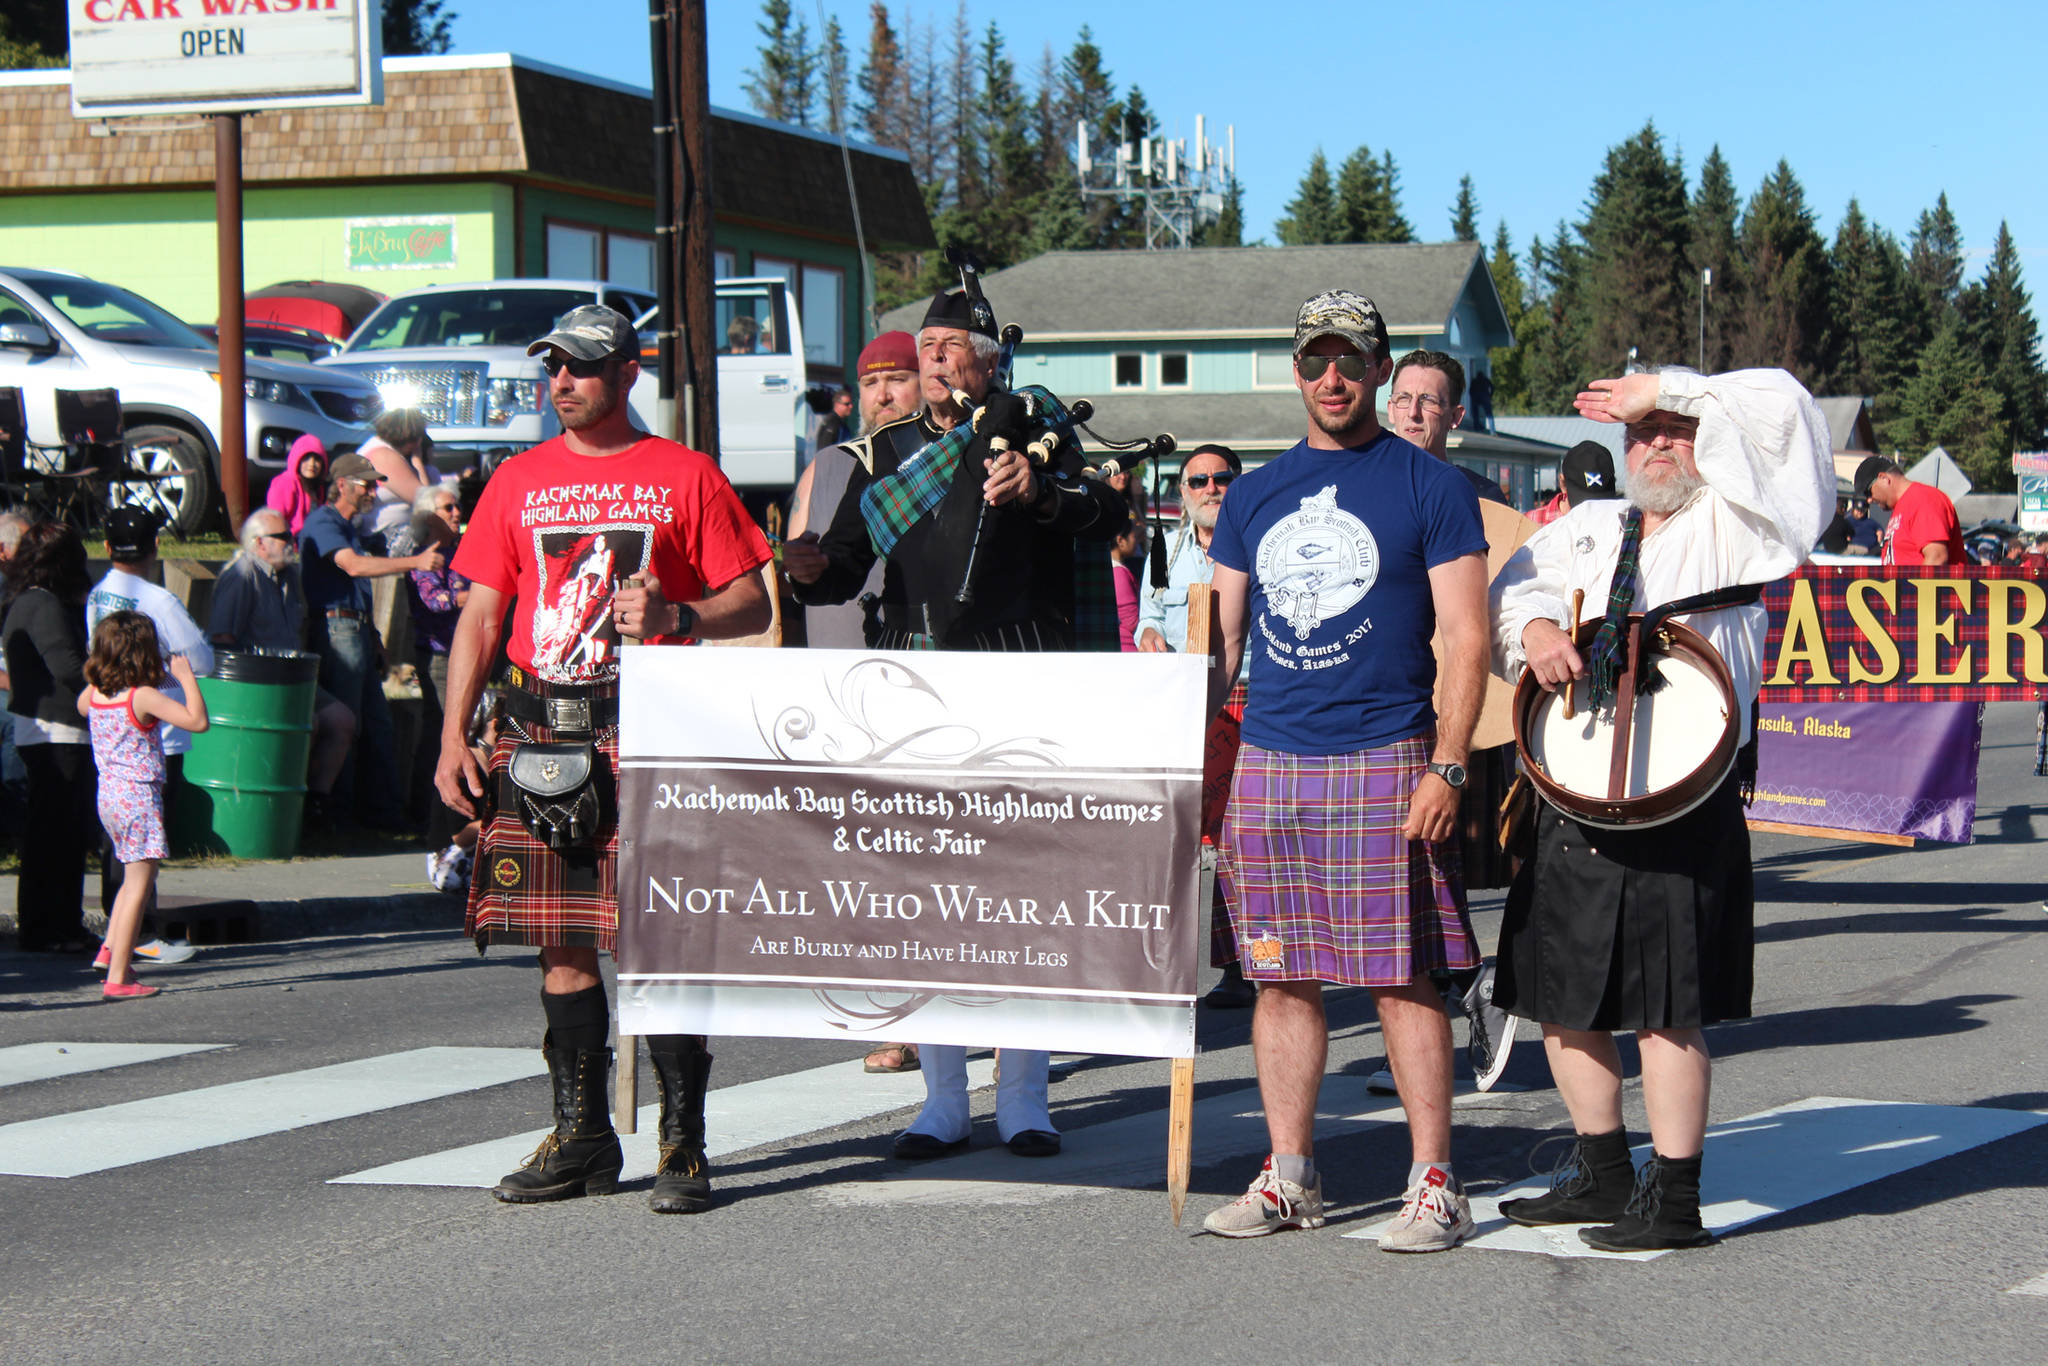 Members of the Kachemak Bay Scottish Club march in this year’s Independence Day parade Wednesday, July 4, 2018 with a banner advertising the annual Kachemak Bay Scottish Highland Games and Celtic Fair, on Pioneer Avenue in Homer, Alaska. (Photo by Megan Pacer/Homer News)